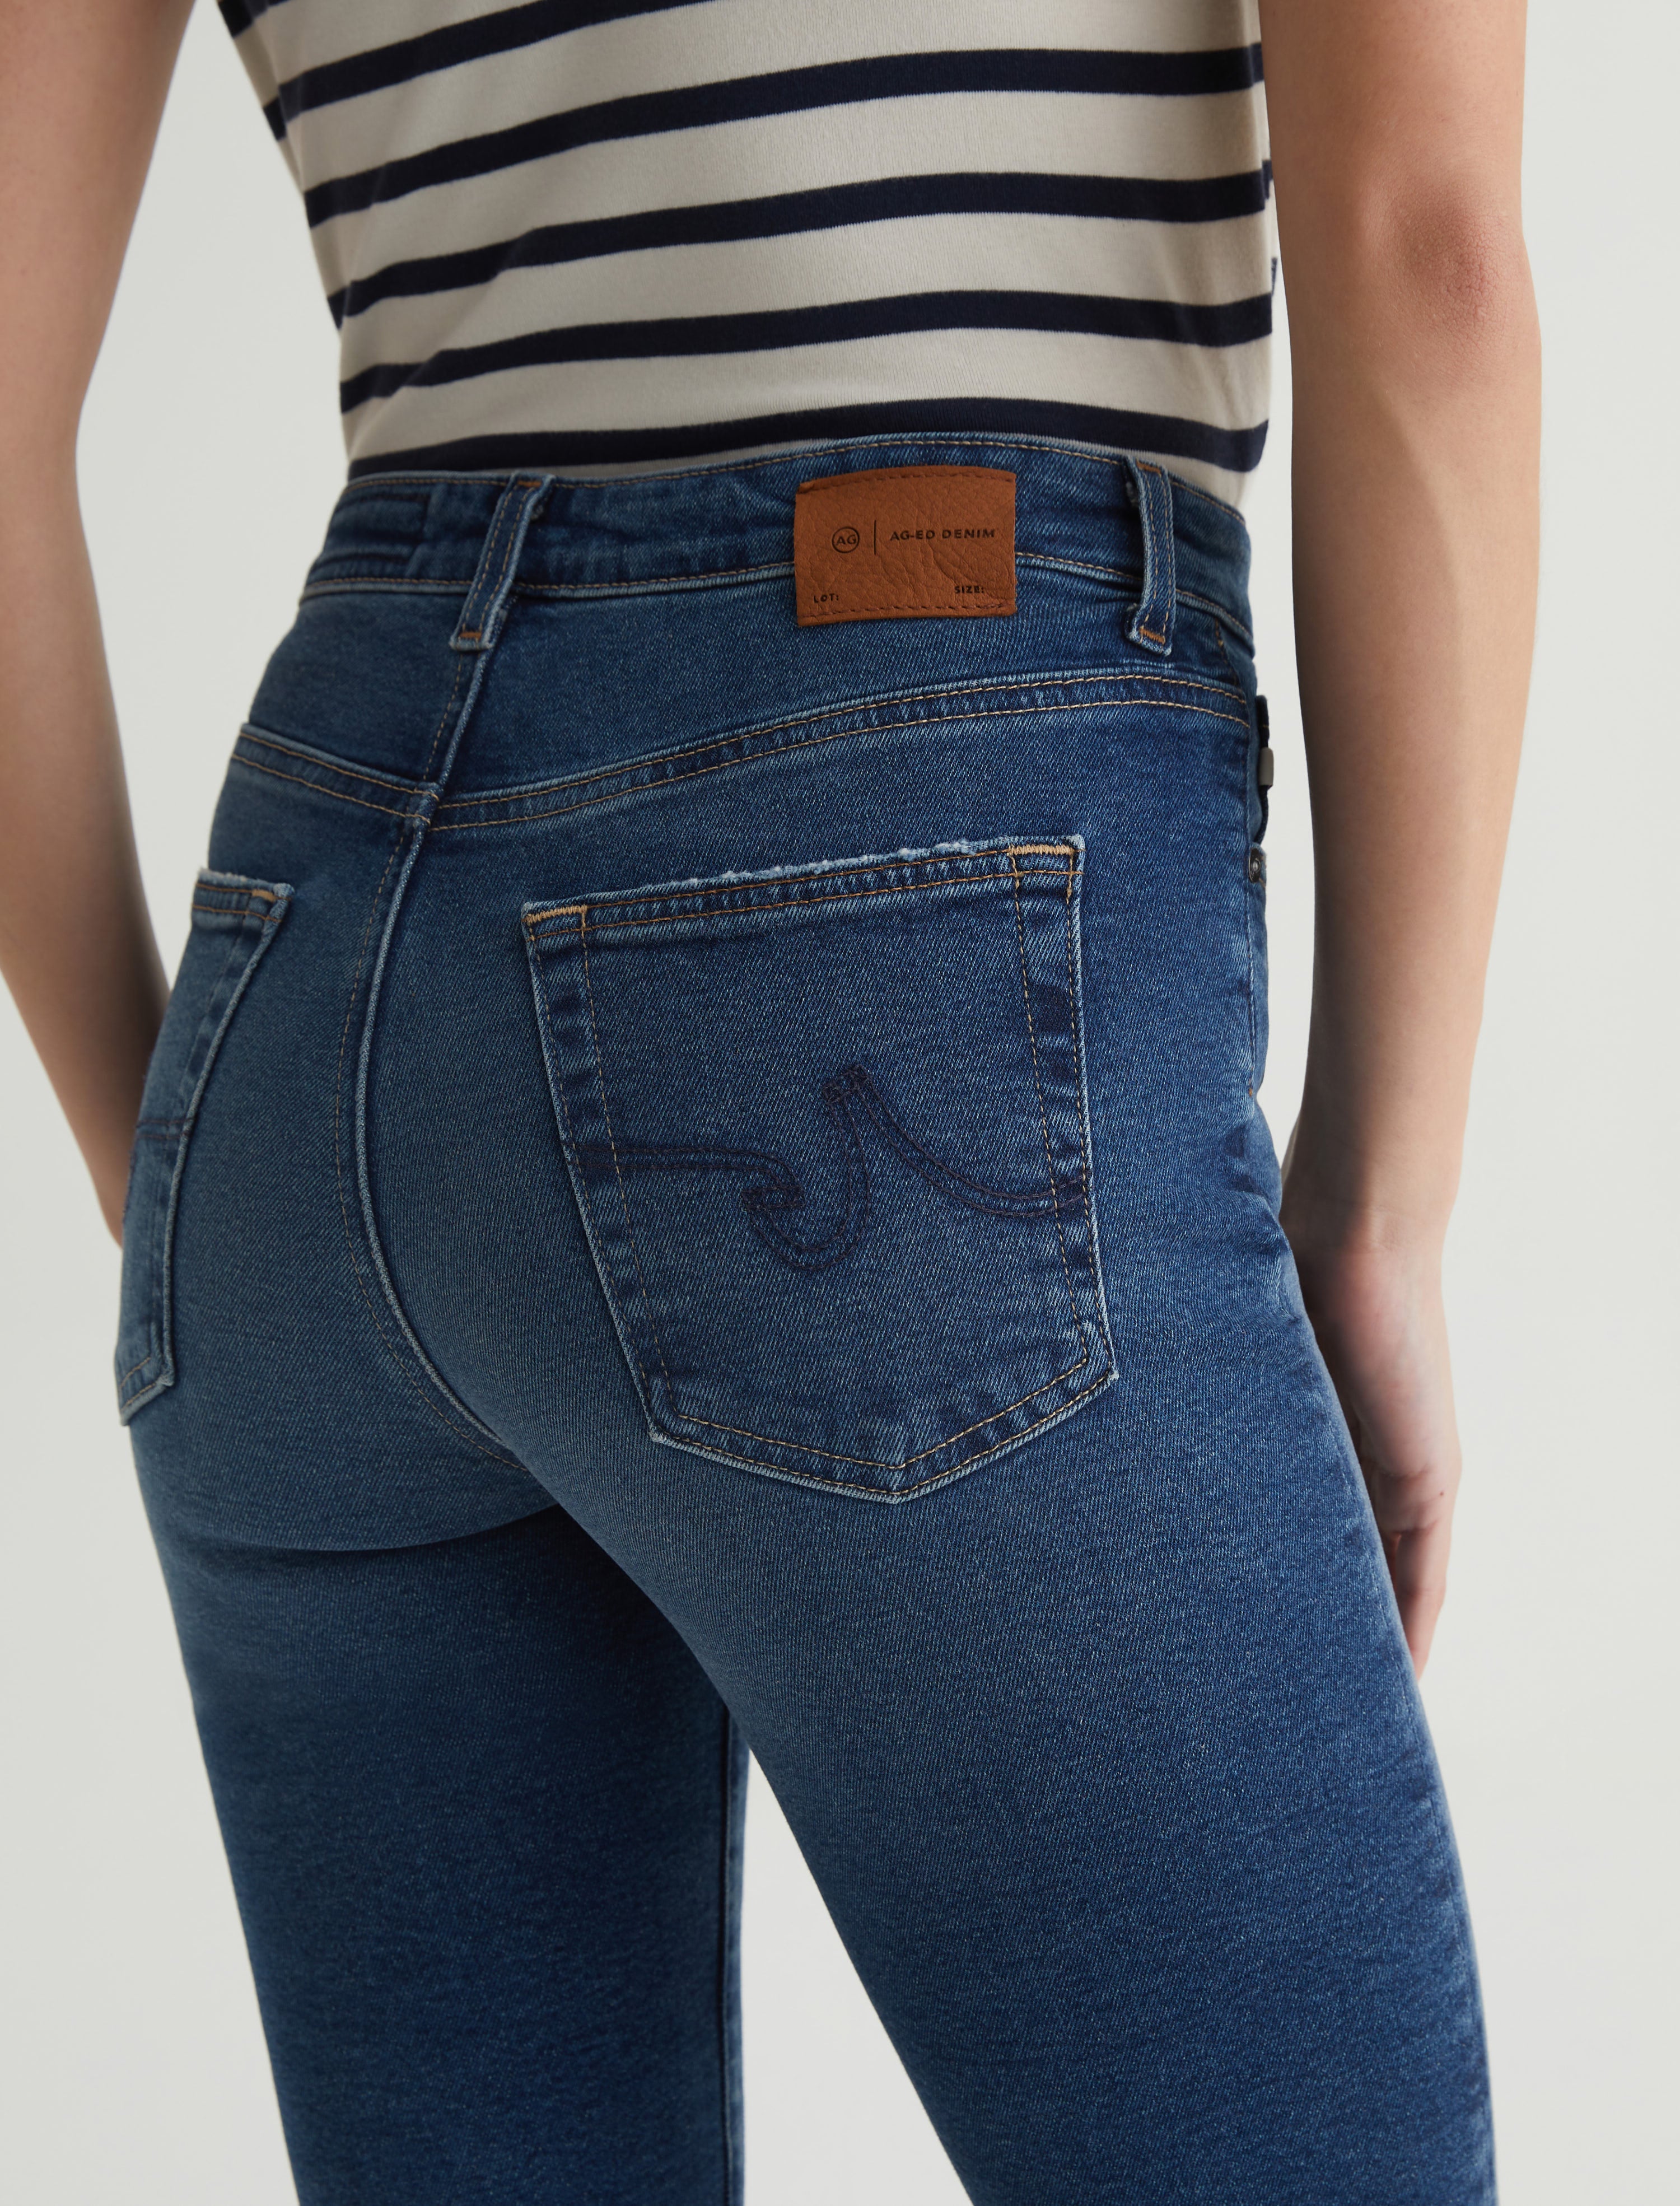 Womens Saige 9 Years Elmhurst at AG Jeans Official Store